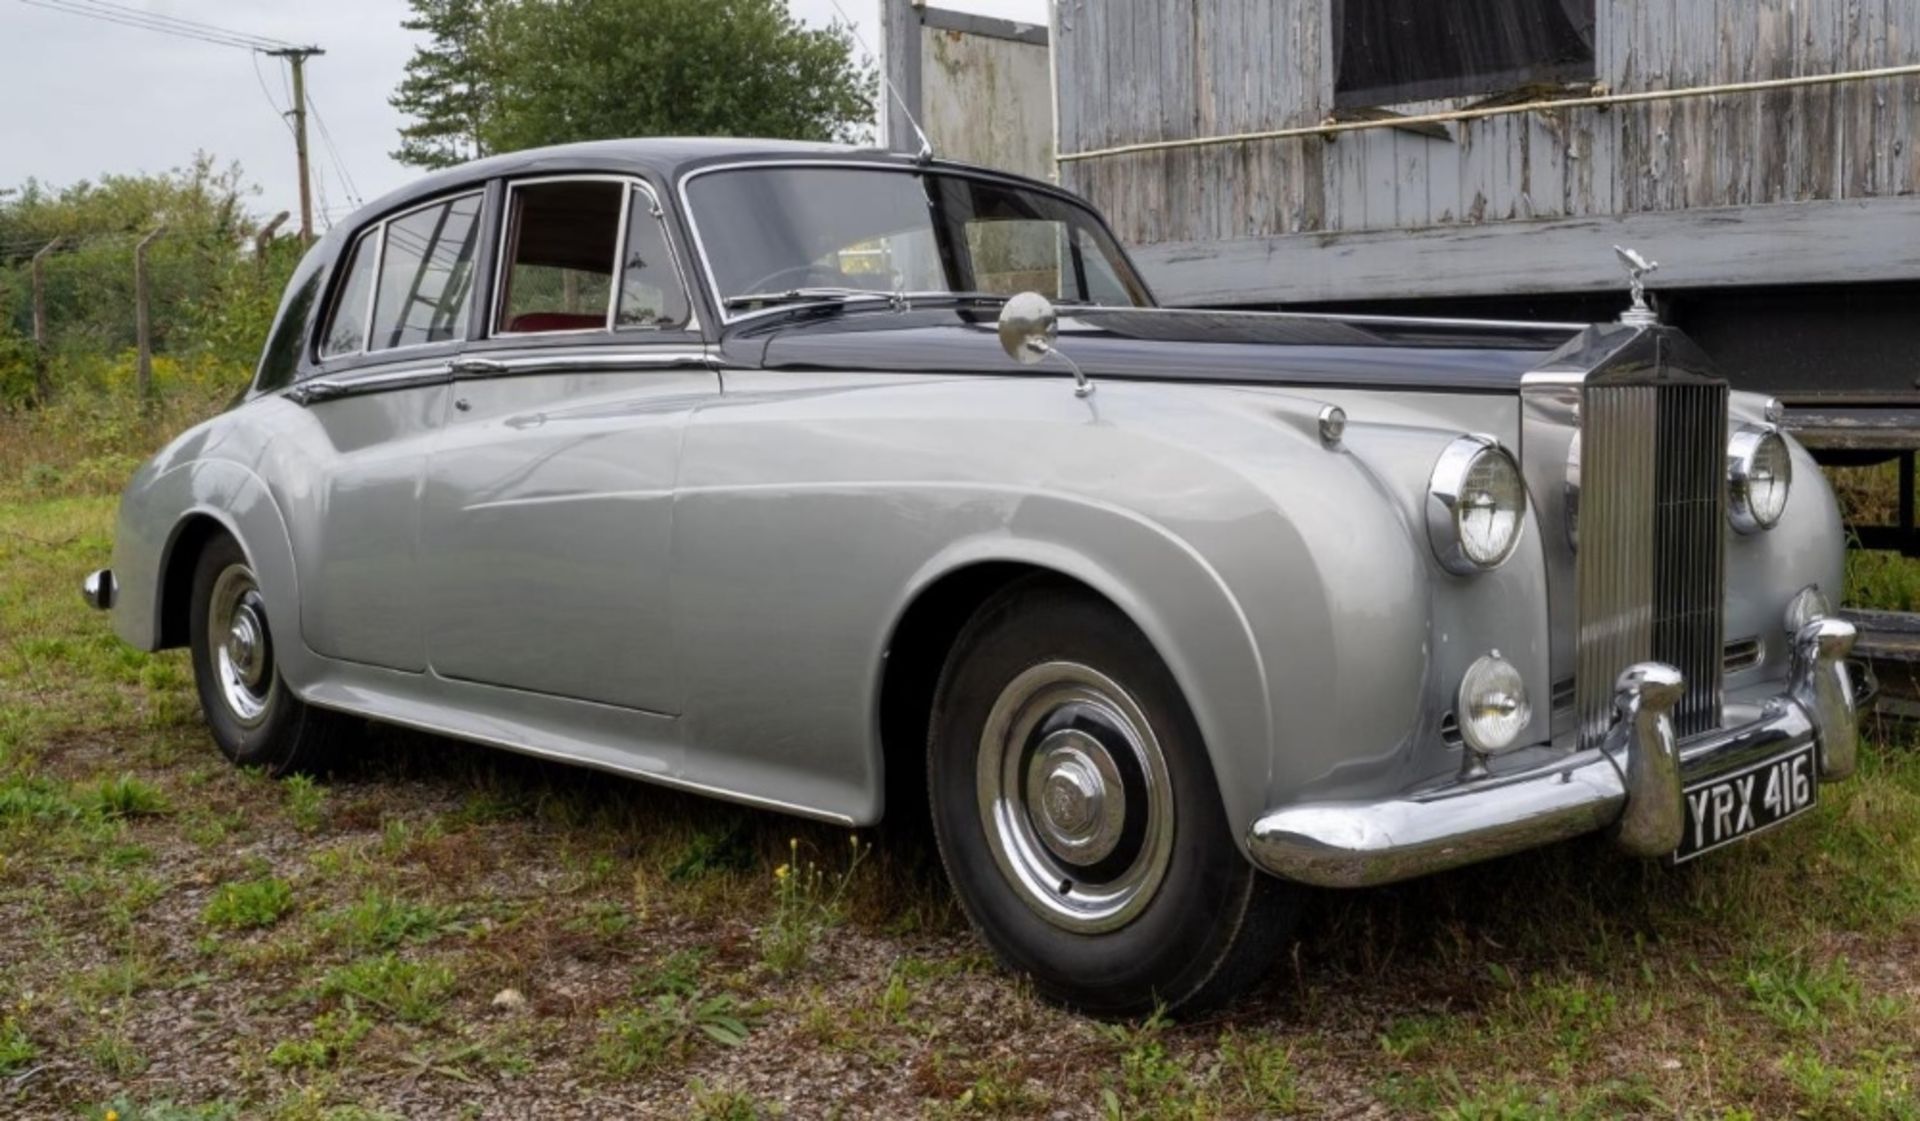 1957 ROLLS-ROYCE SILVER CLOUD Registration Number: YRX 416 Chassis Number: SED429 Recorded - Image 7 of 24